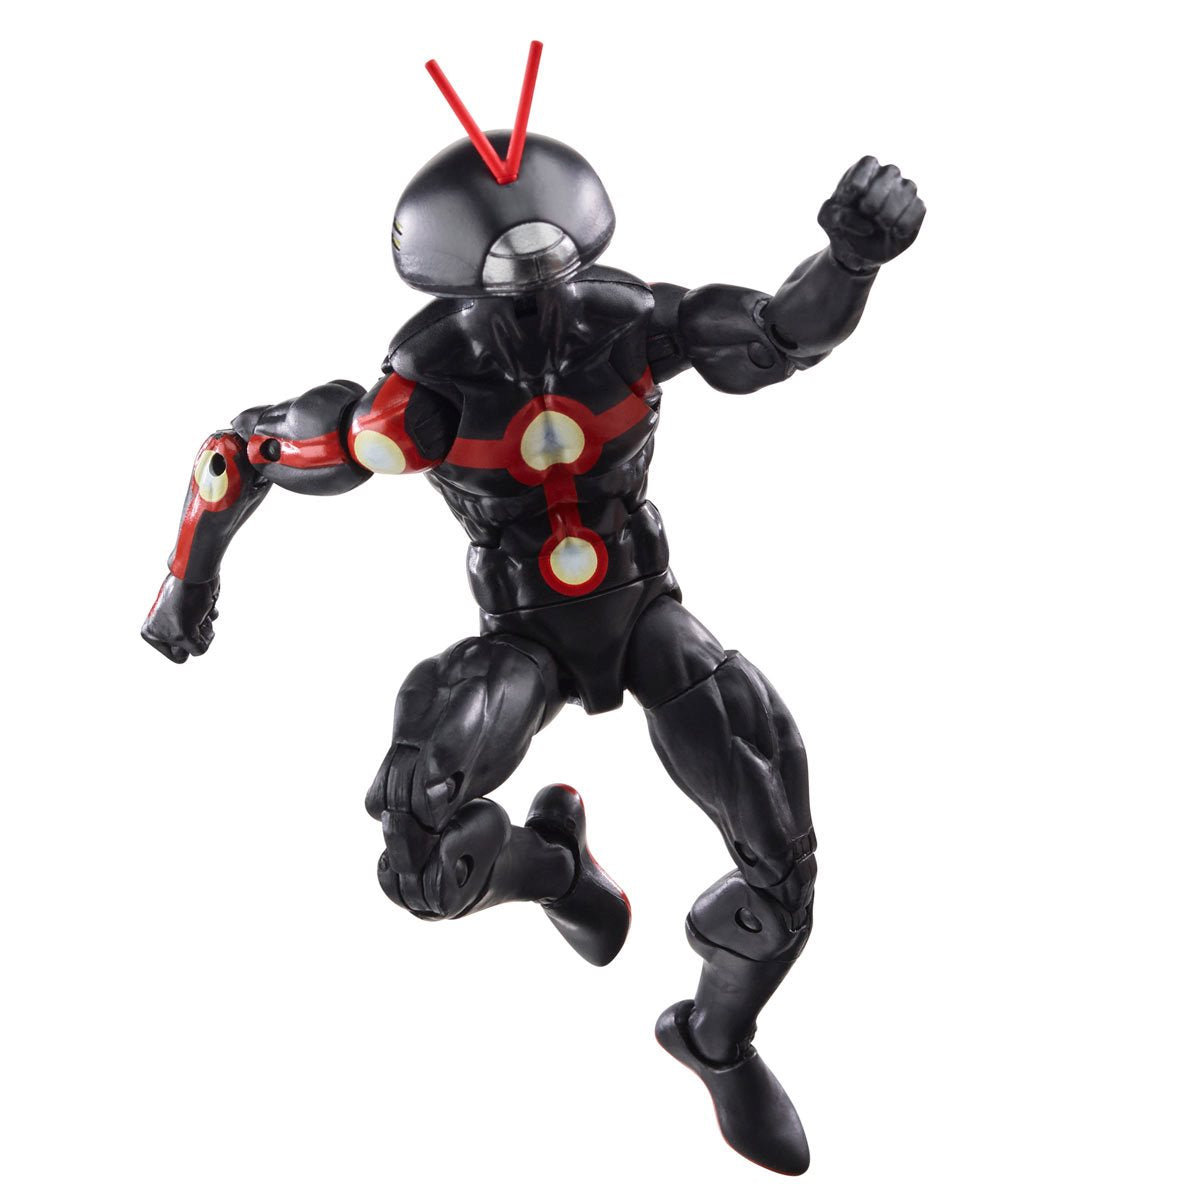 Ant-Man & the Wasp: Quantumania Marvel Legends Future Ant-Man 6-Inch Action Figure